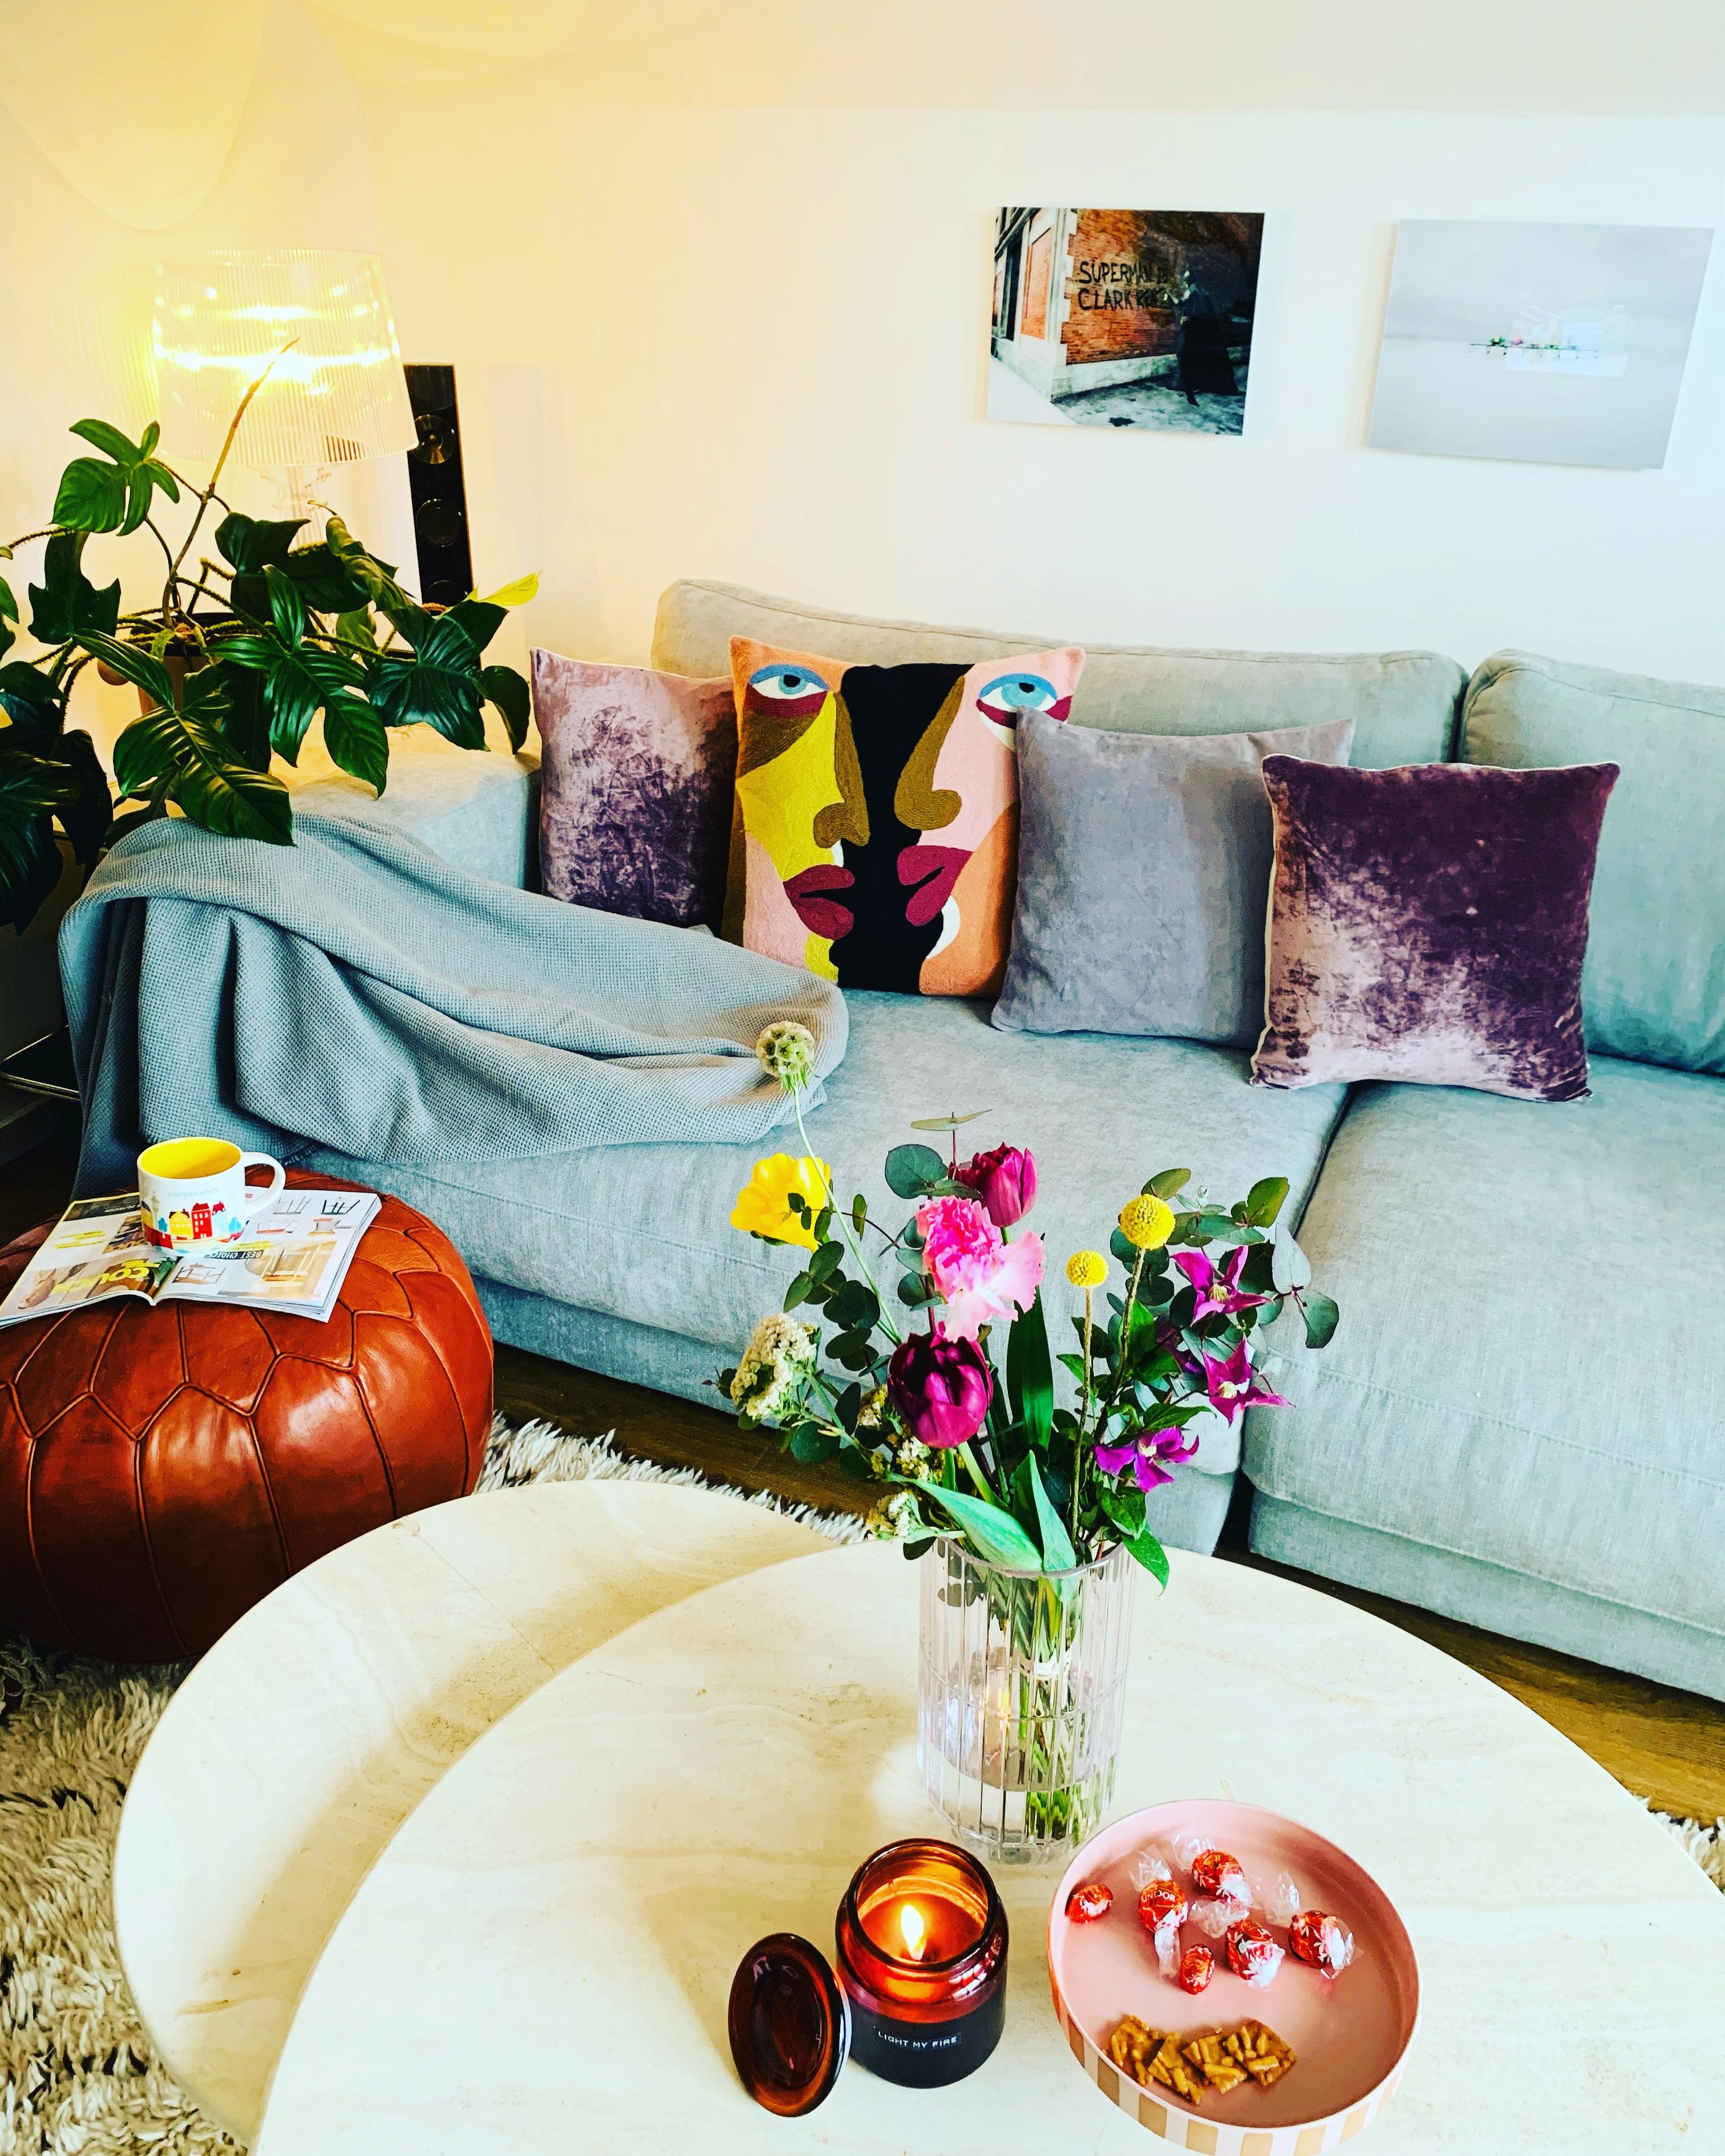 Cosy time, es wird wieder kuschelig! 🍁🧡 #cosy #homestyle #fall #herbst #hygge #interior #couch #livingroom #flowers